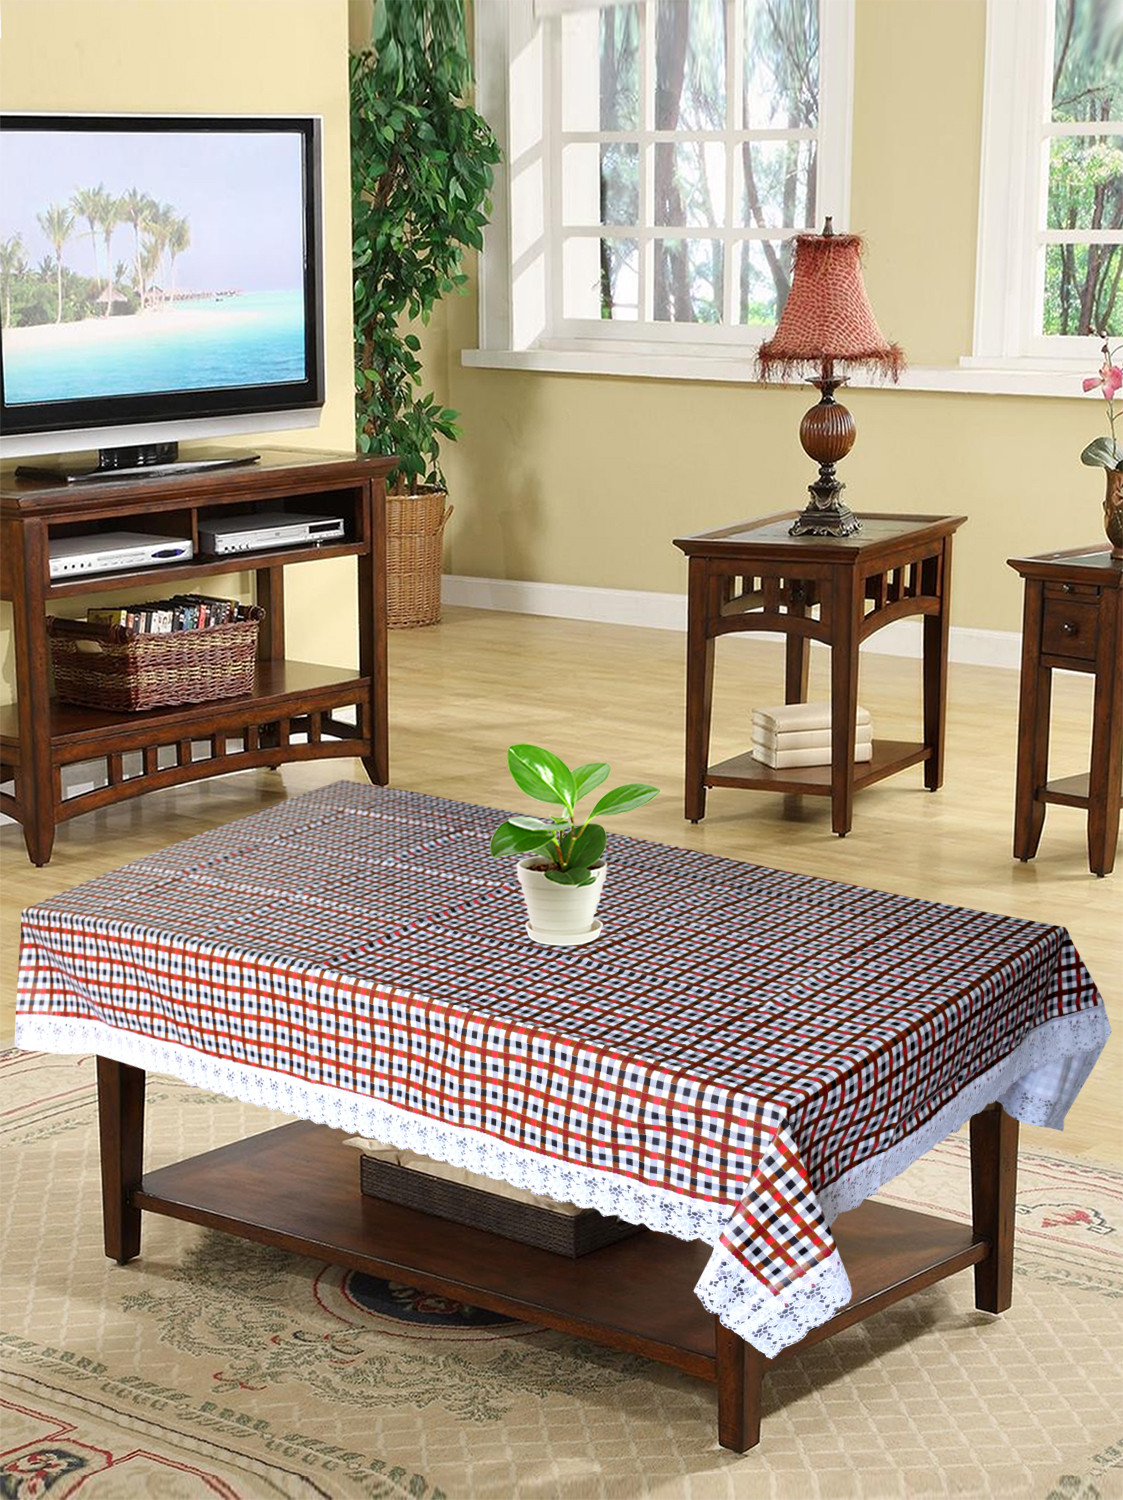 Kuber Industries Check Printed PVC 4 Seater Center Table Cover, Protector With White Lace Border, 40